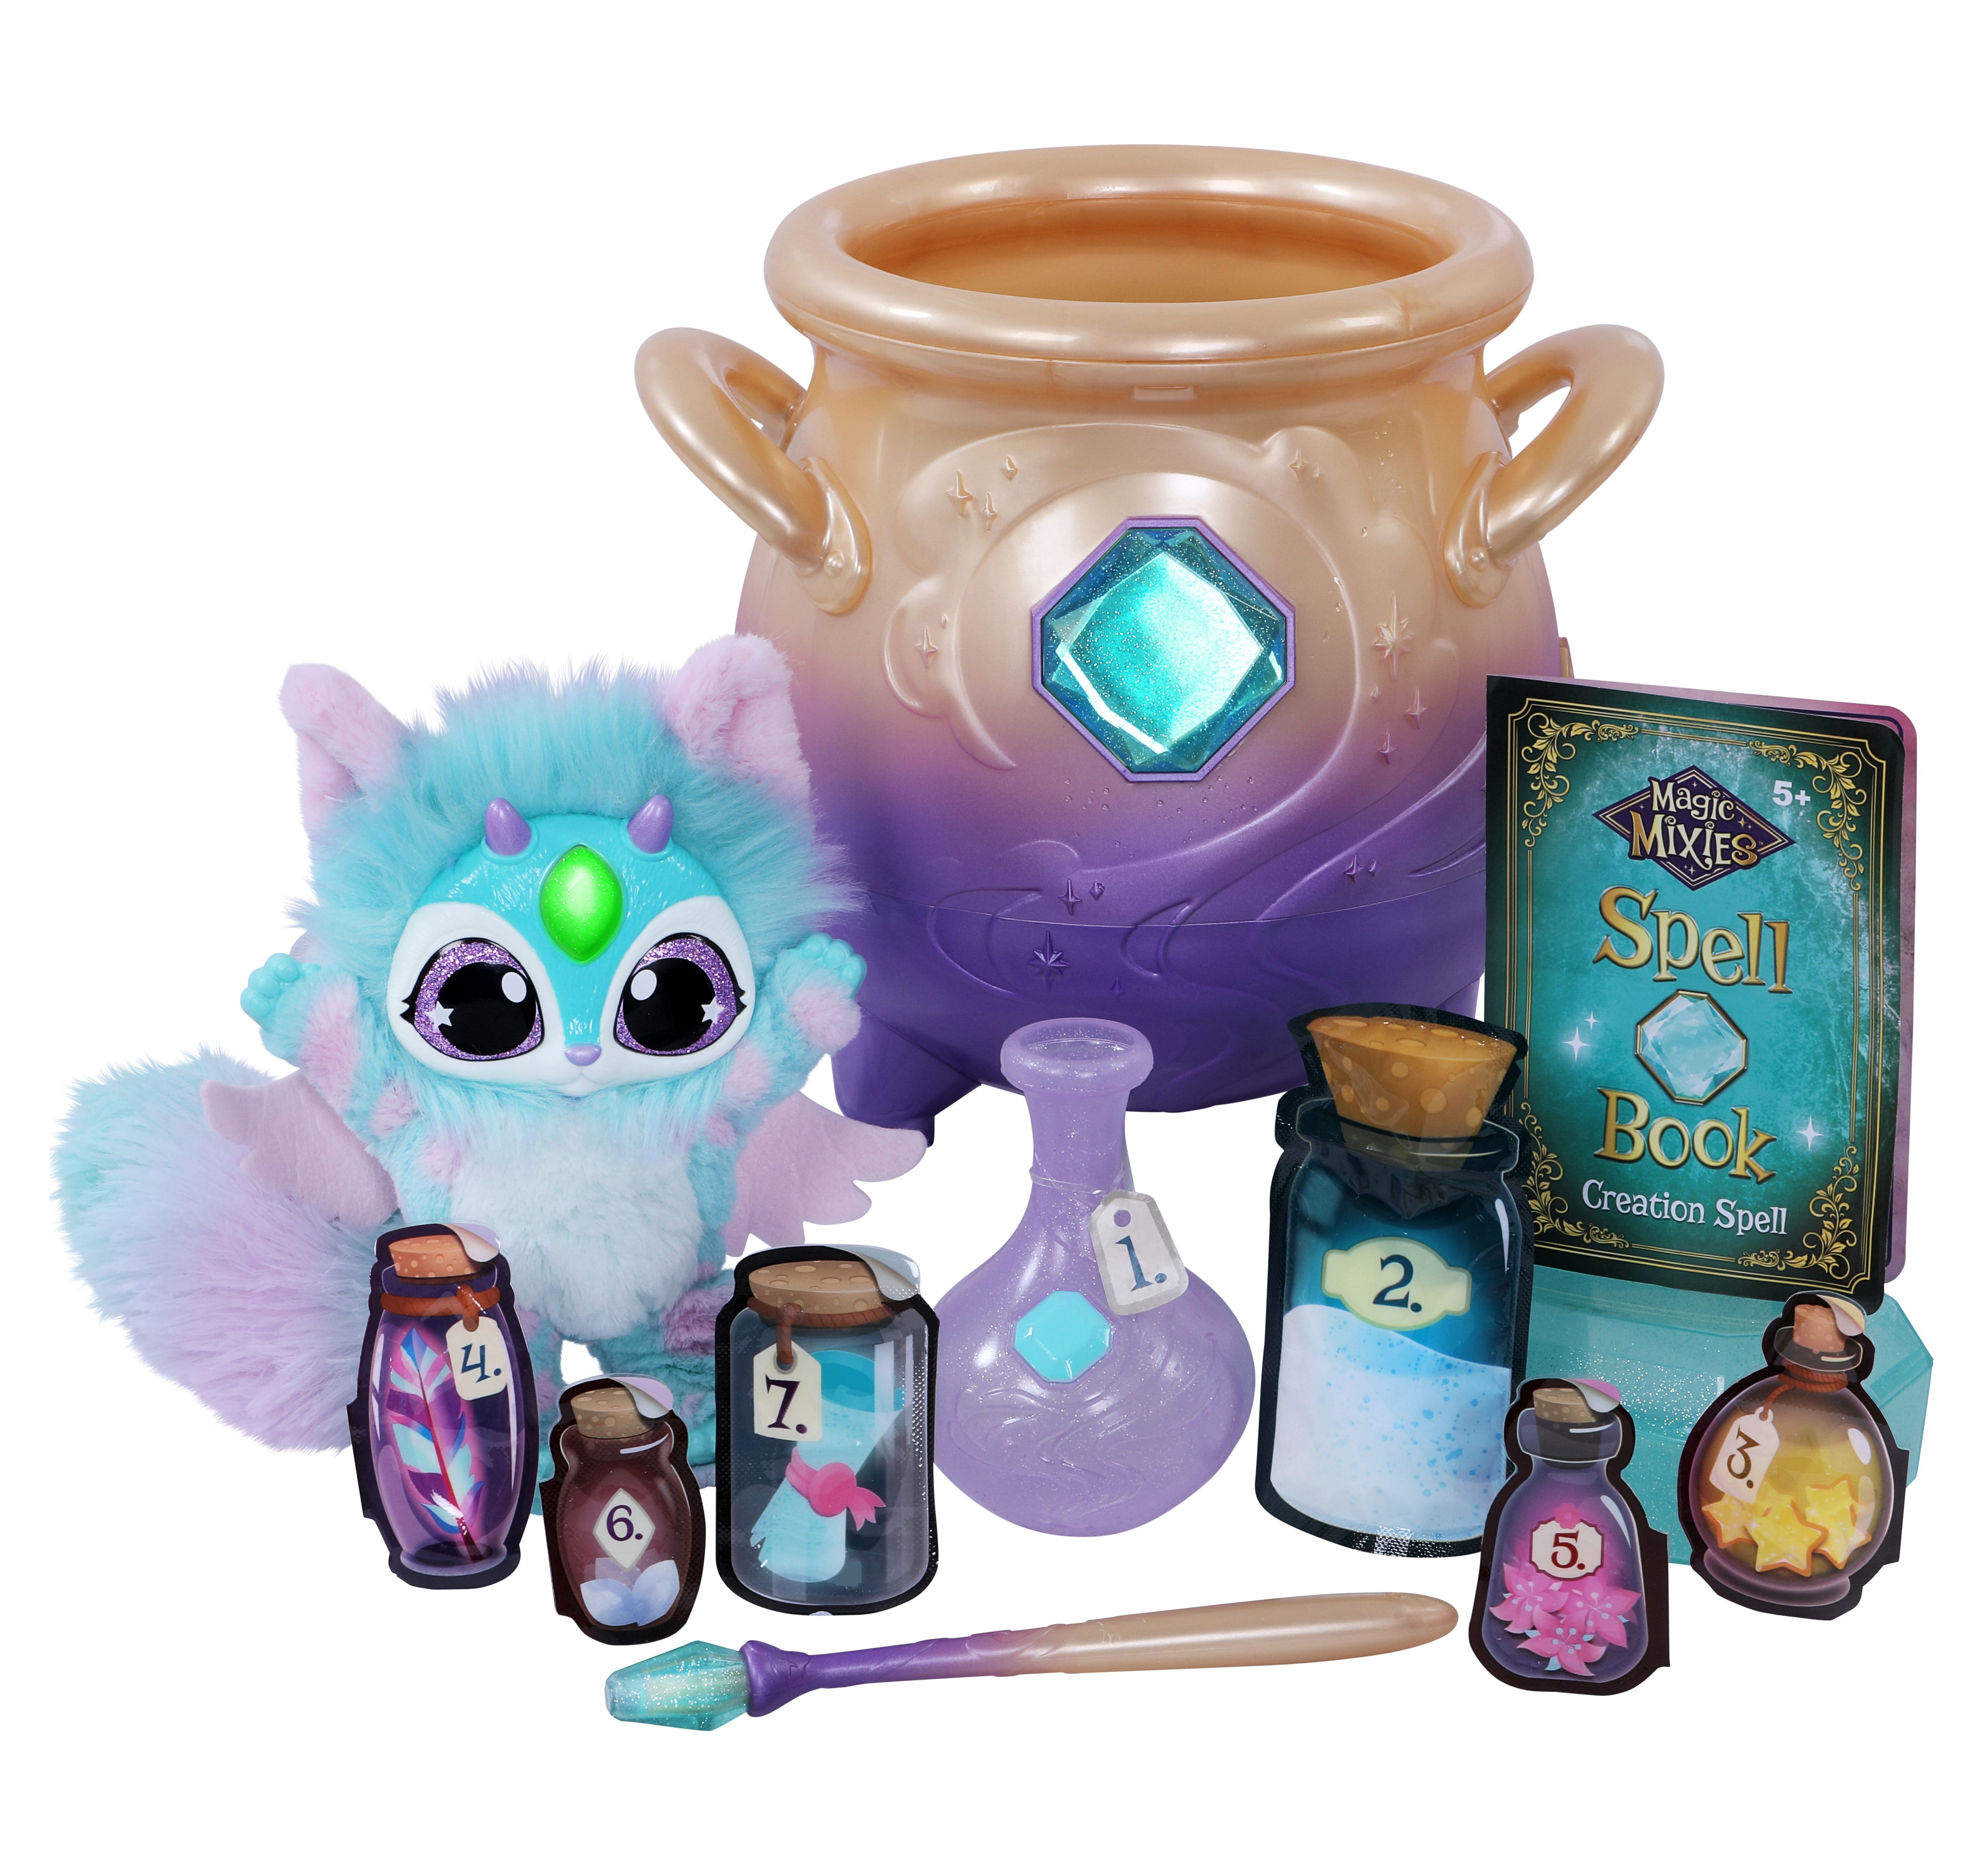 Magic Mixies Magical Misting Cauldron with Interactive 8 inch Blue Plush Toy and 50+ Sounds and Reactions, Toys for Kids, Ages 5+ - image 1 of 15